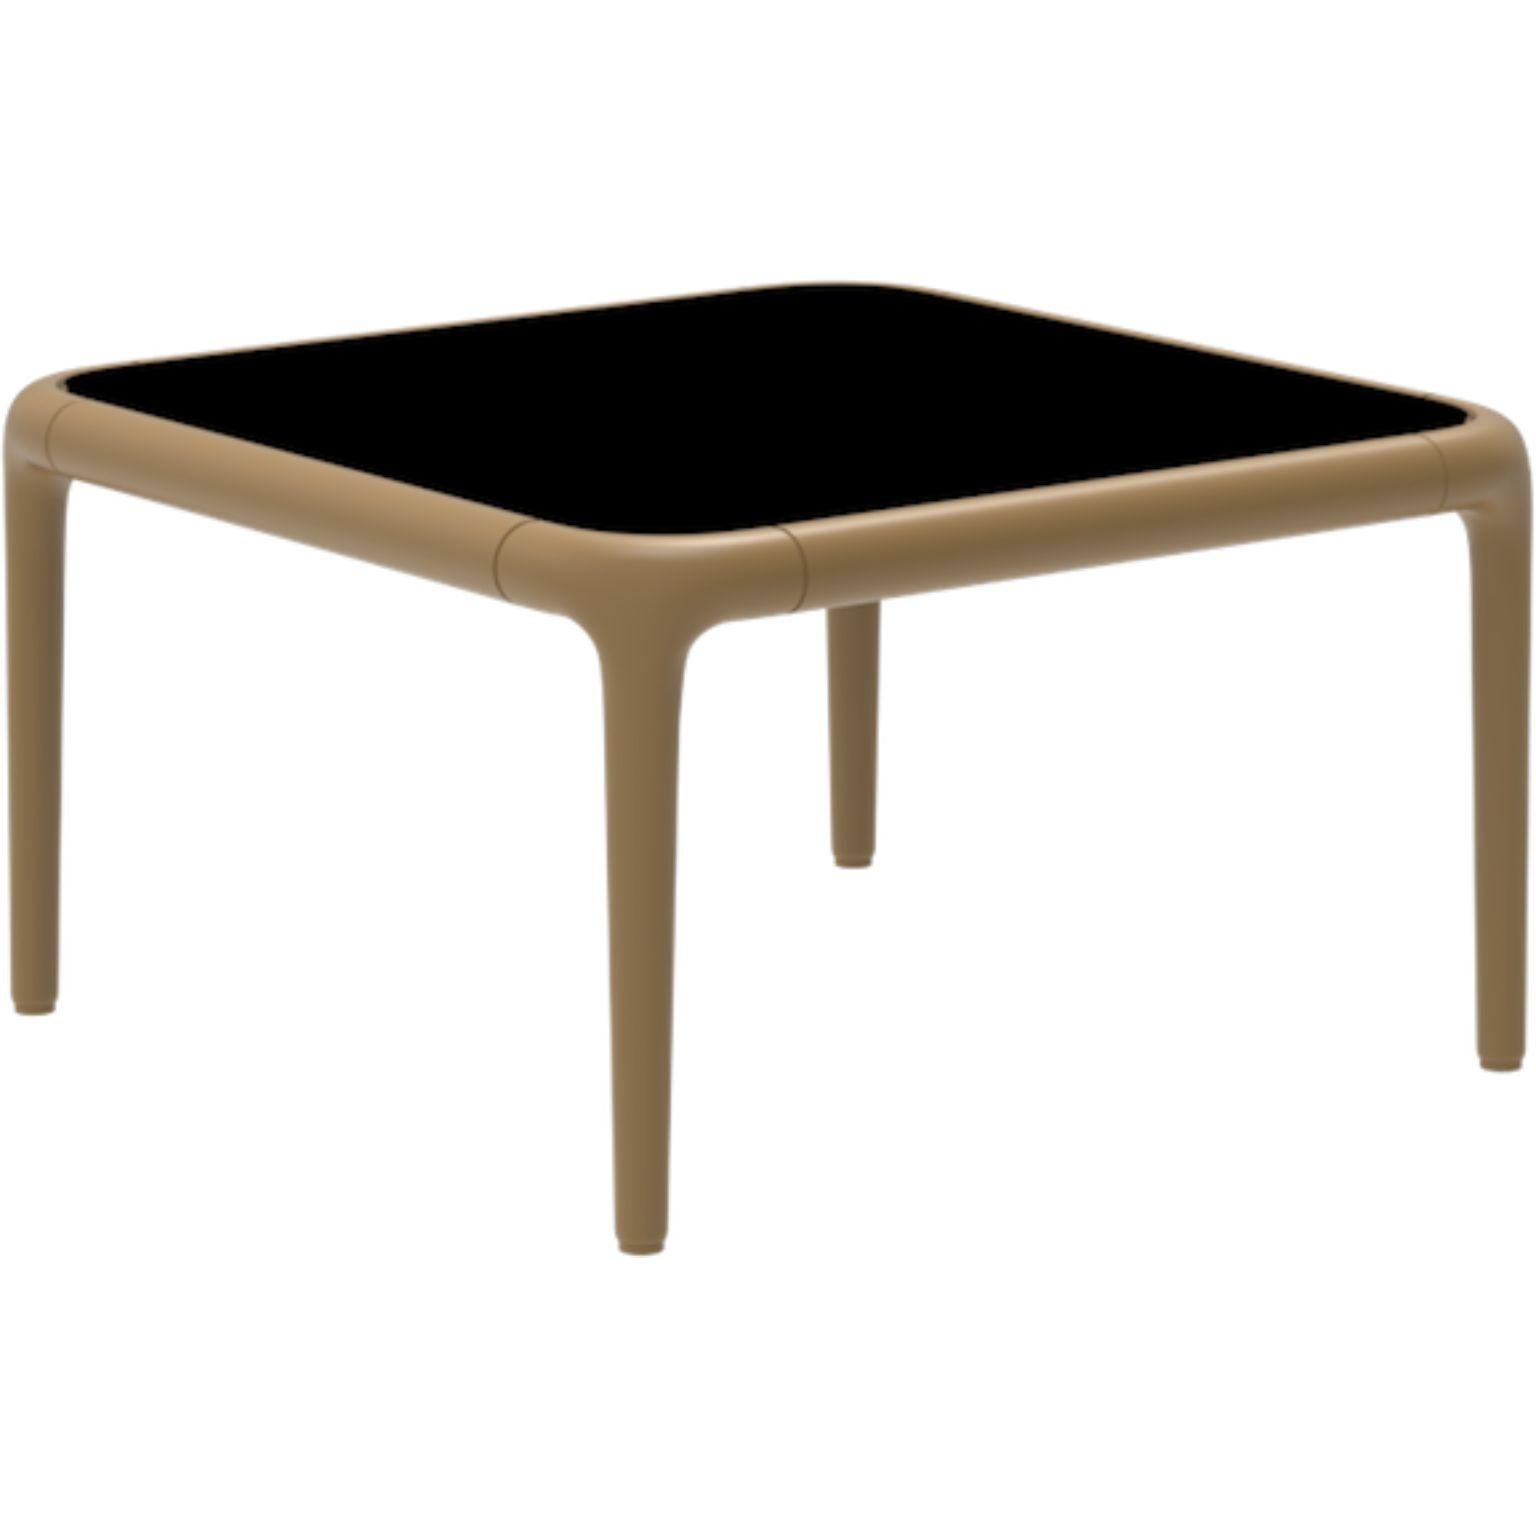 Xaloc gold coffee Table 50 with Glass Top by Mowee.
Dimensions: D50 x W50 x H28 cm.
Materials: Aluminum, tinted tempered glass top.
Also available in different aluminum colors and finishes (HPL Black Edge or Neolith). 

Xaloc synthesizes the